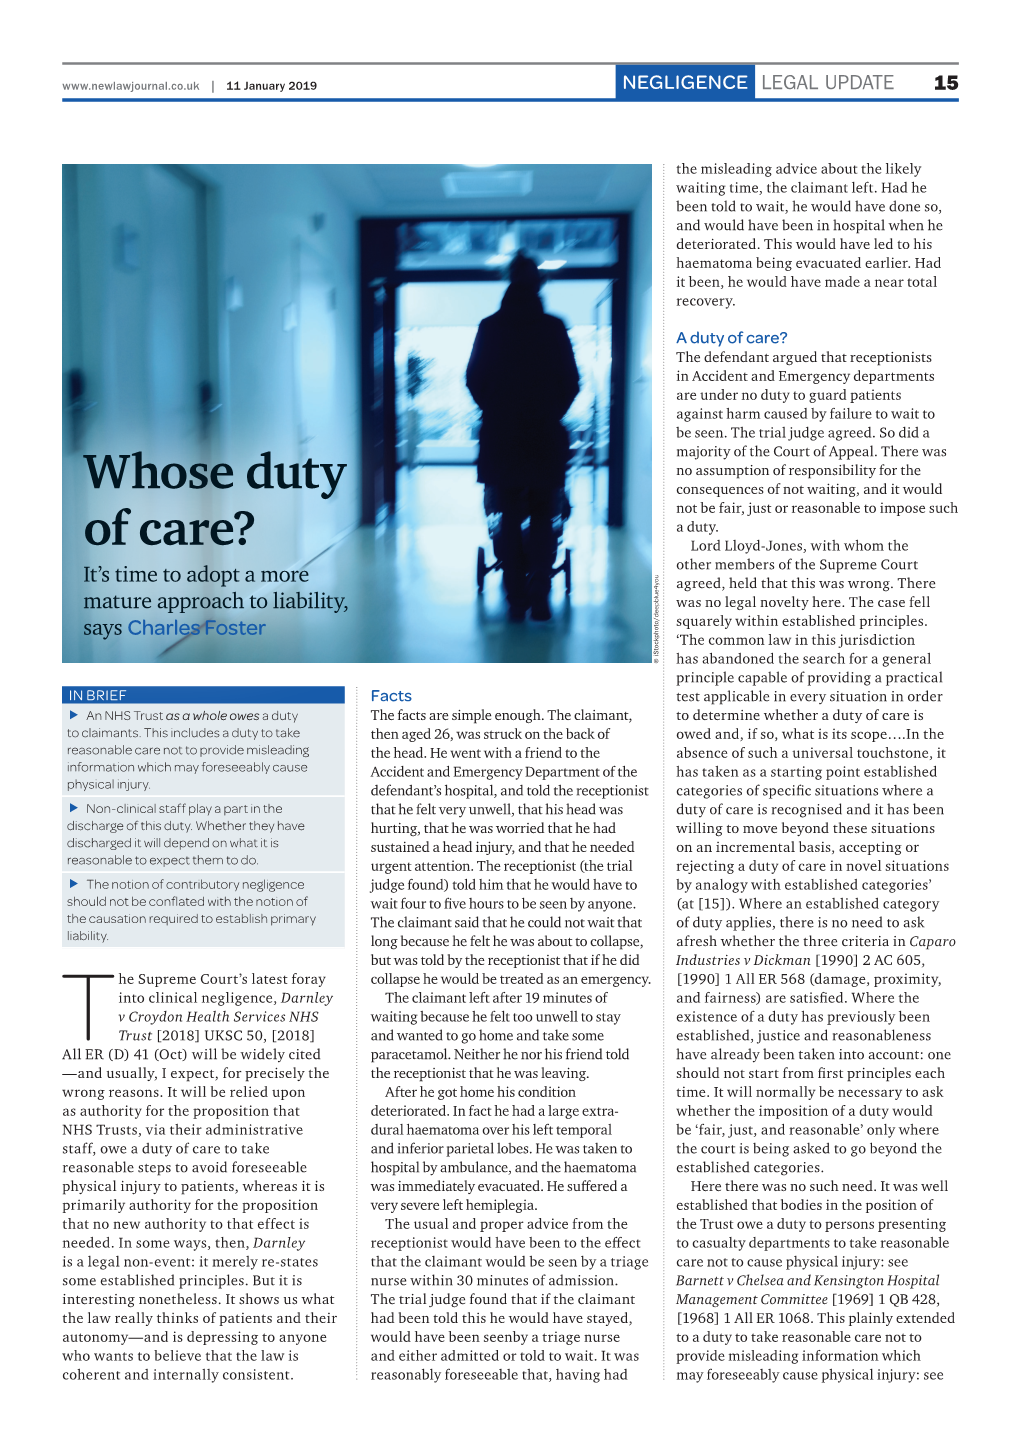 Whose Duty of Care?